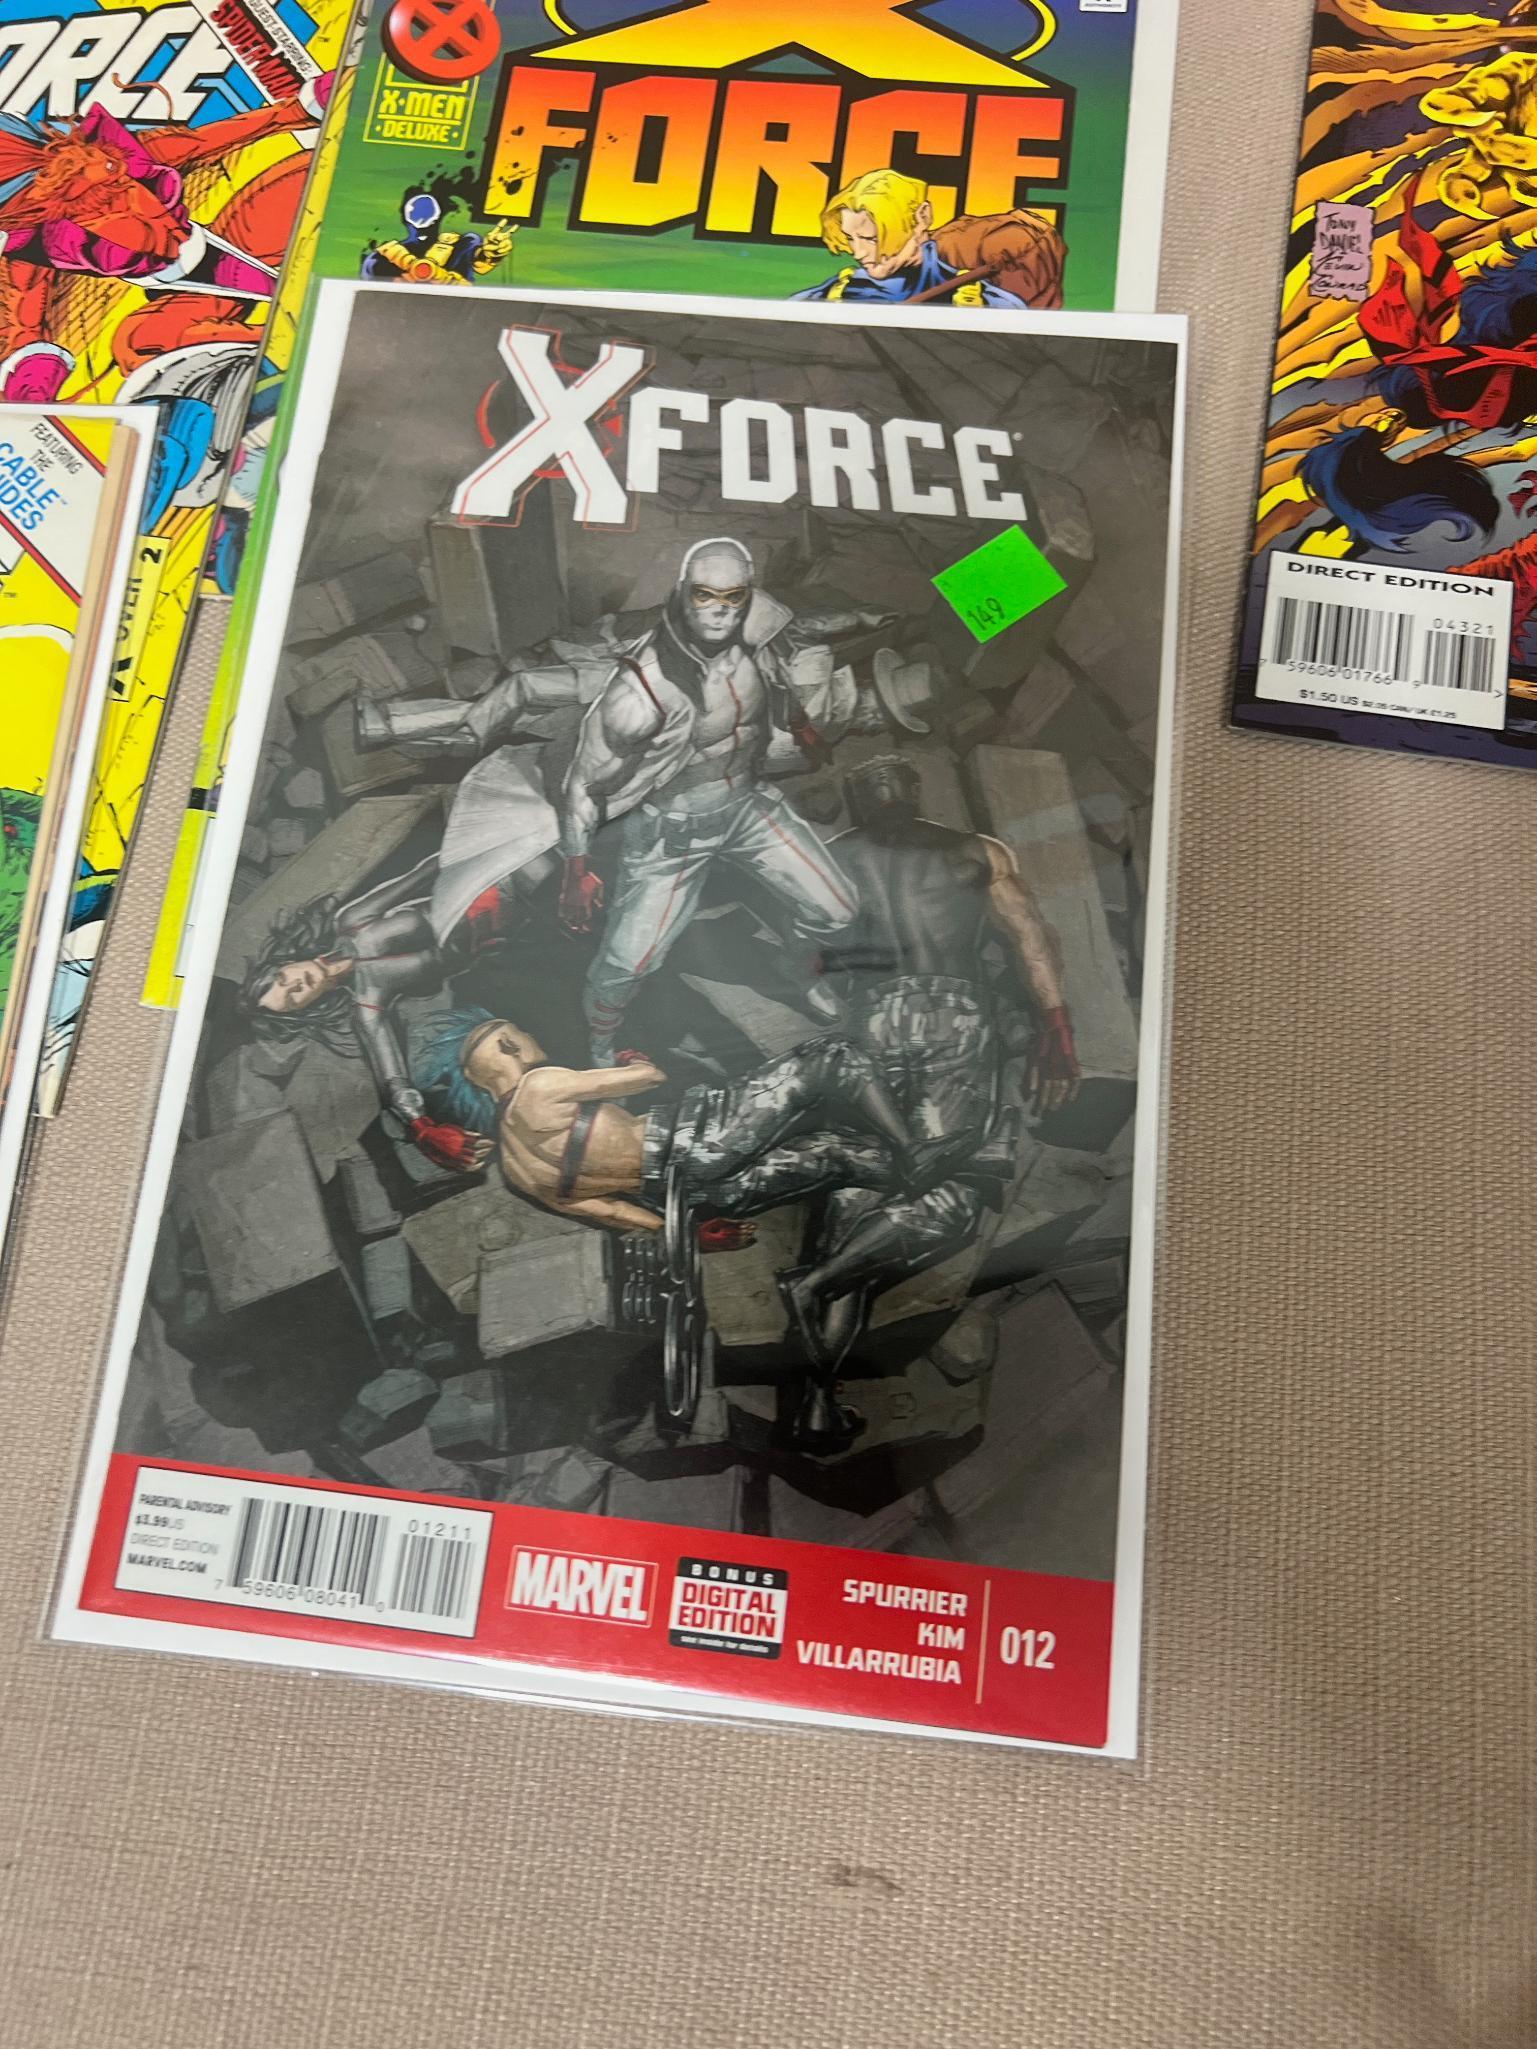 Lot of Asst. X Force and X-51 Comic Books among others